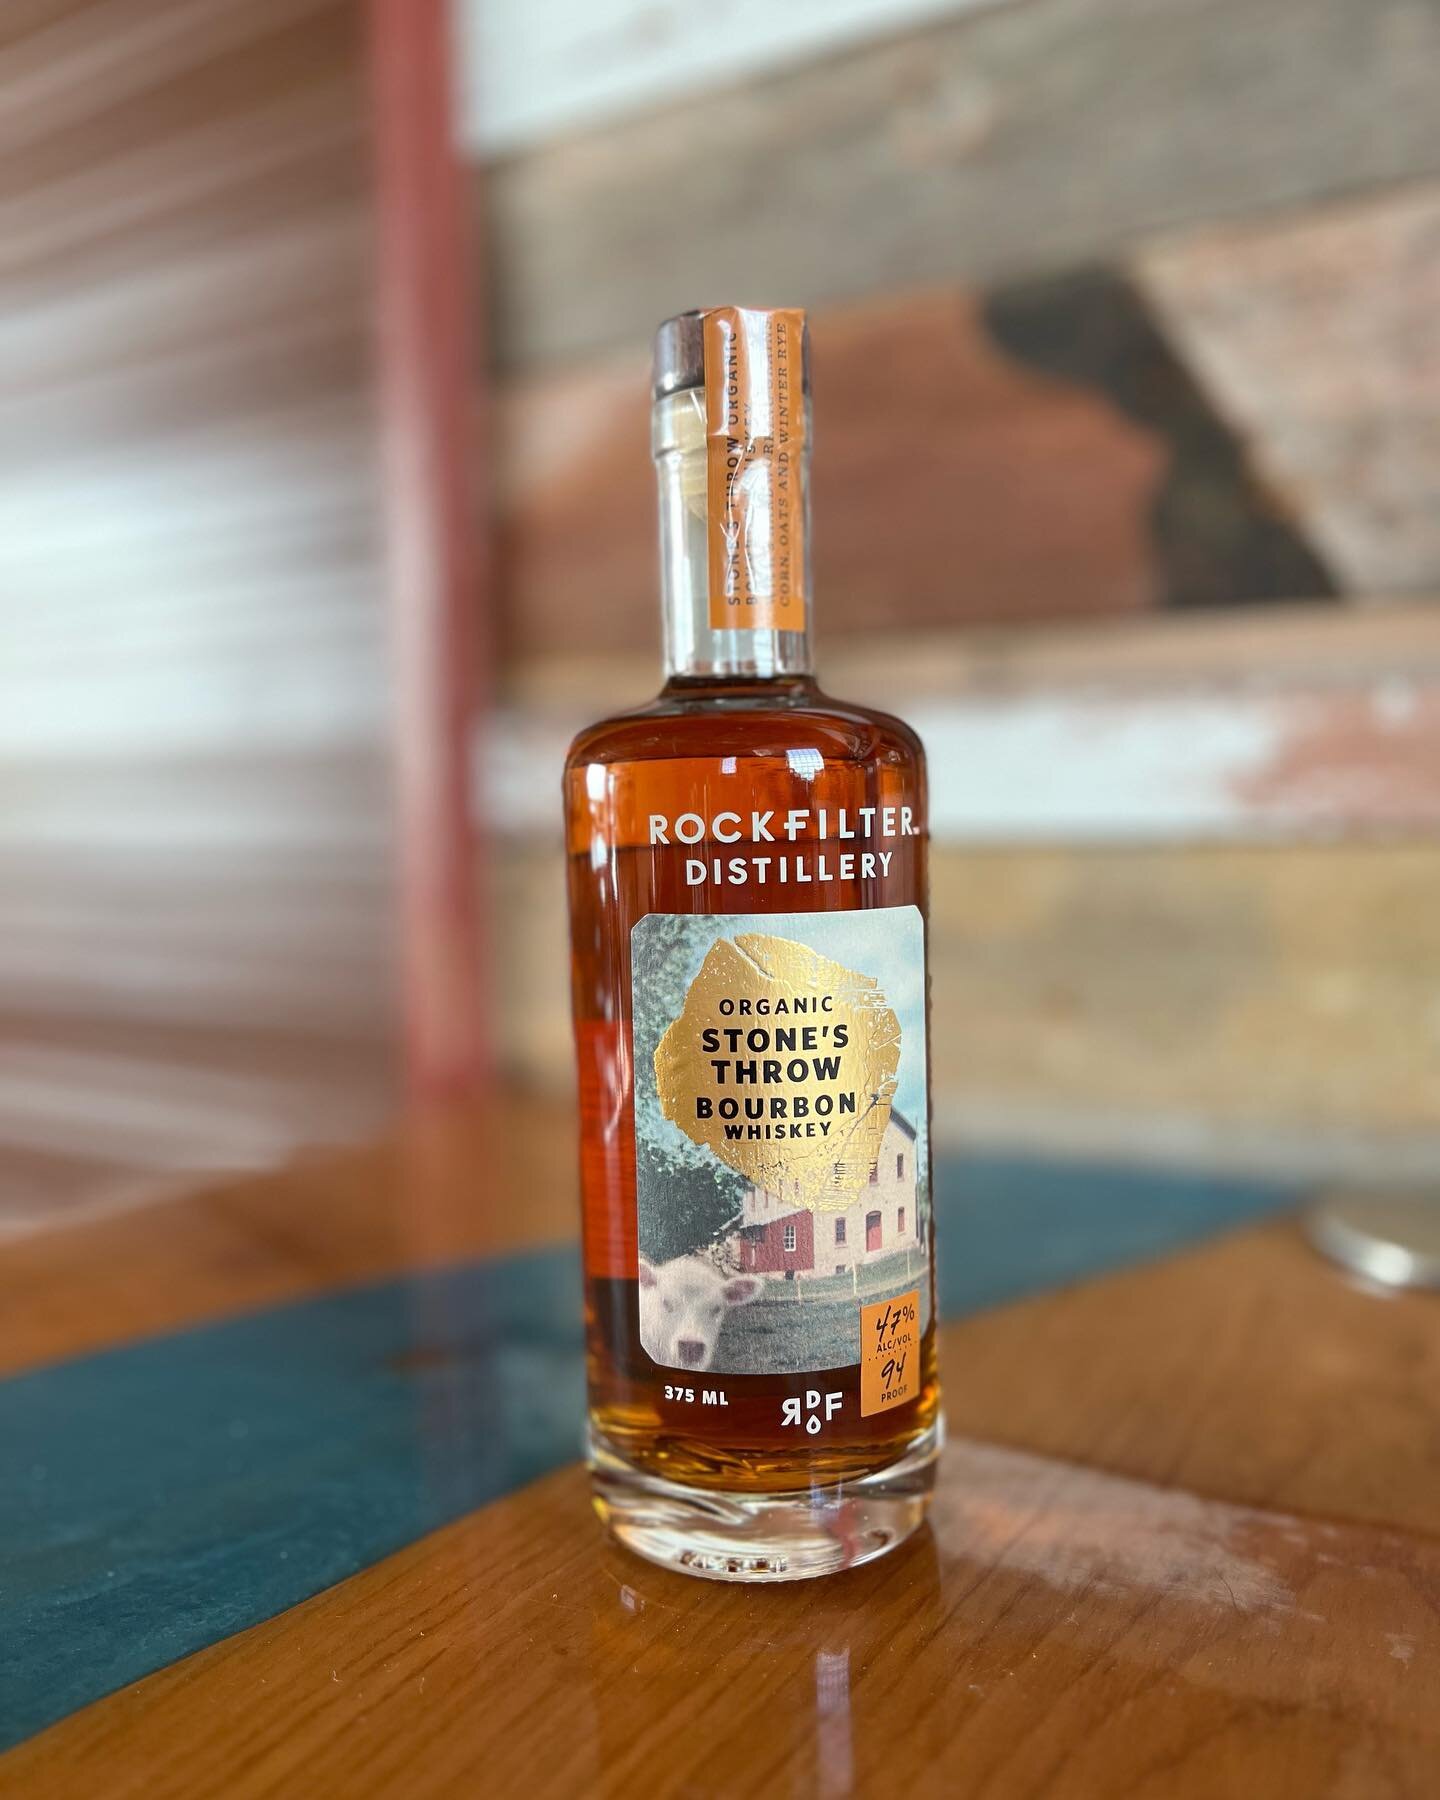 Good things are worth waiting for. Stones Throw is back on the retail shelf at the distillery. Stop in this weekend and snag your bottle! #cheers #stonesthrowbourbon #rockfilterdistillery